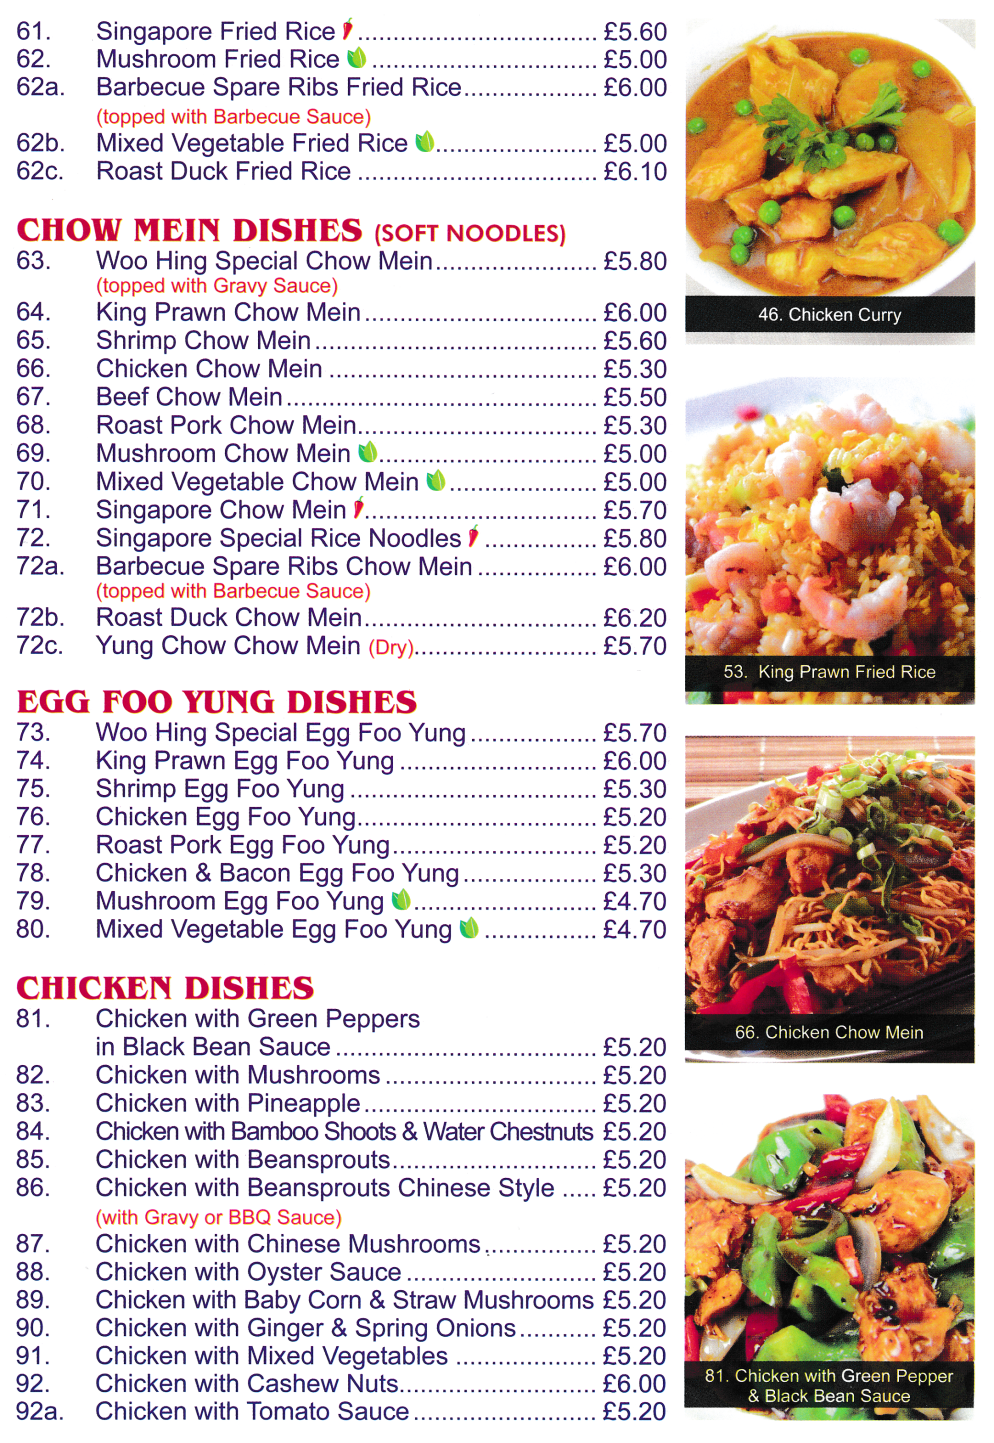 Menu for Woo Hing Chinese takeaway (Chop Suey, Fried Rice, Egg Foo Yung, Oyster Sauce, Satay Sauce dishes..)